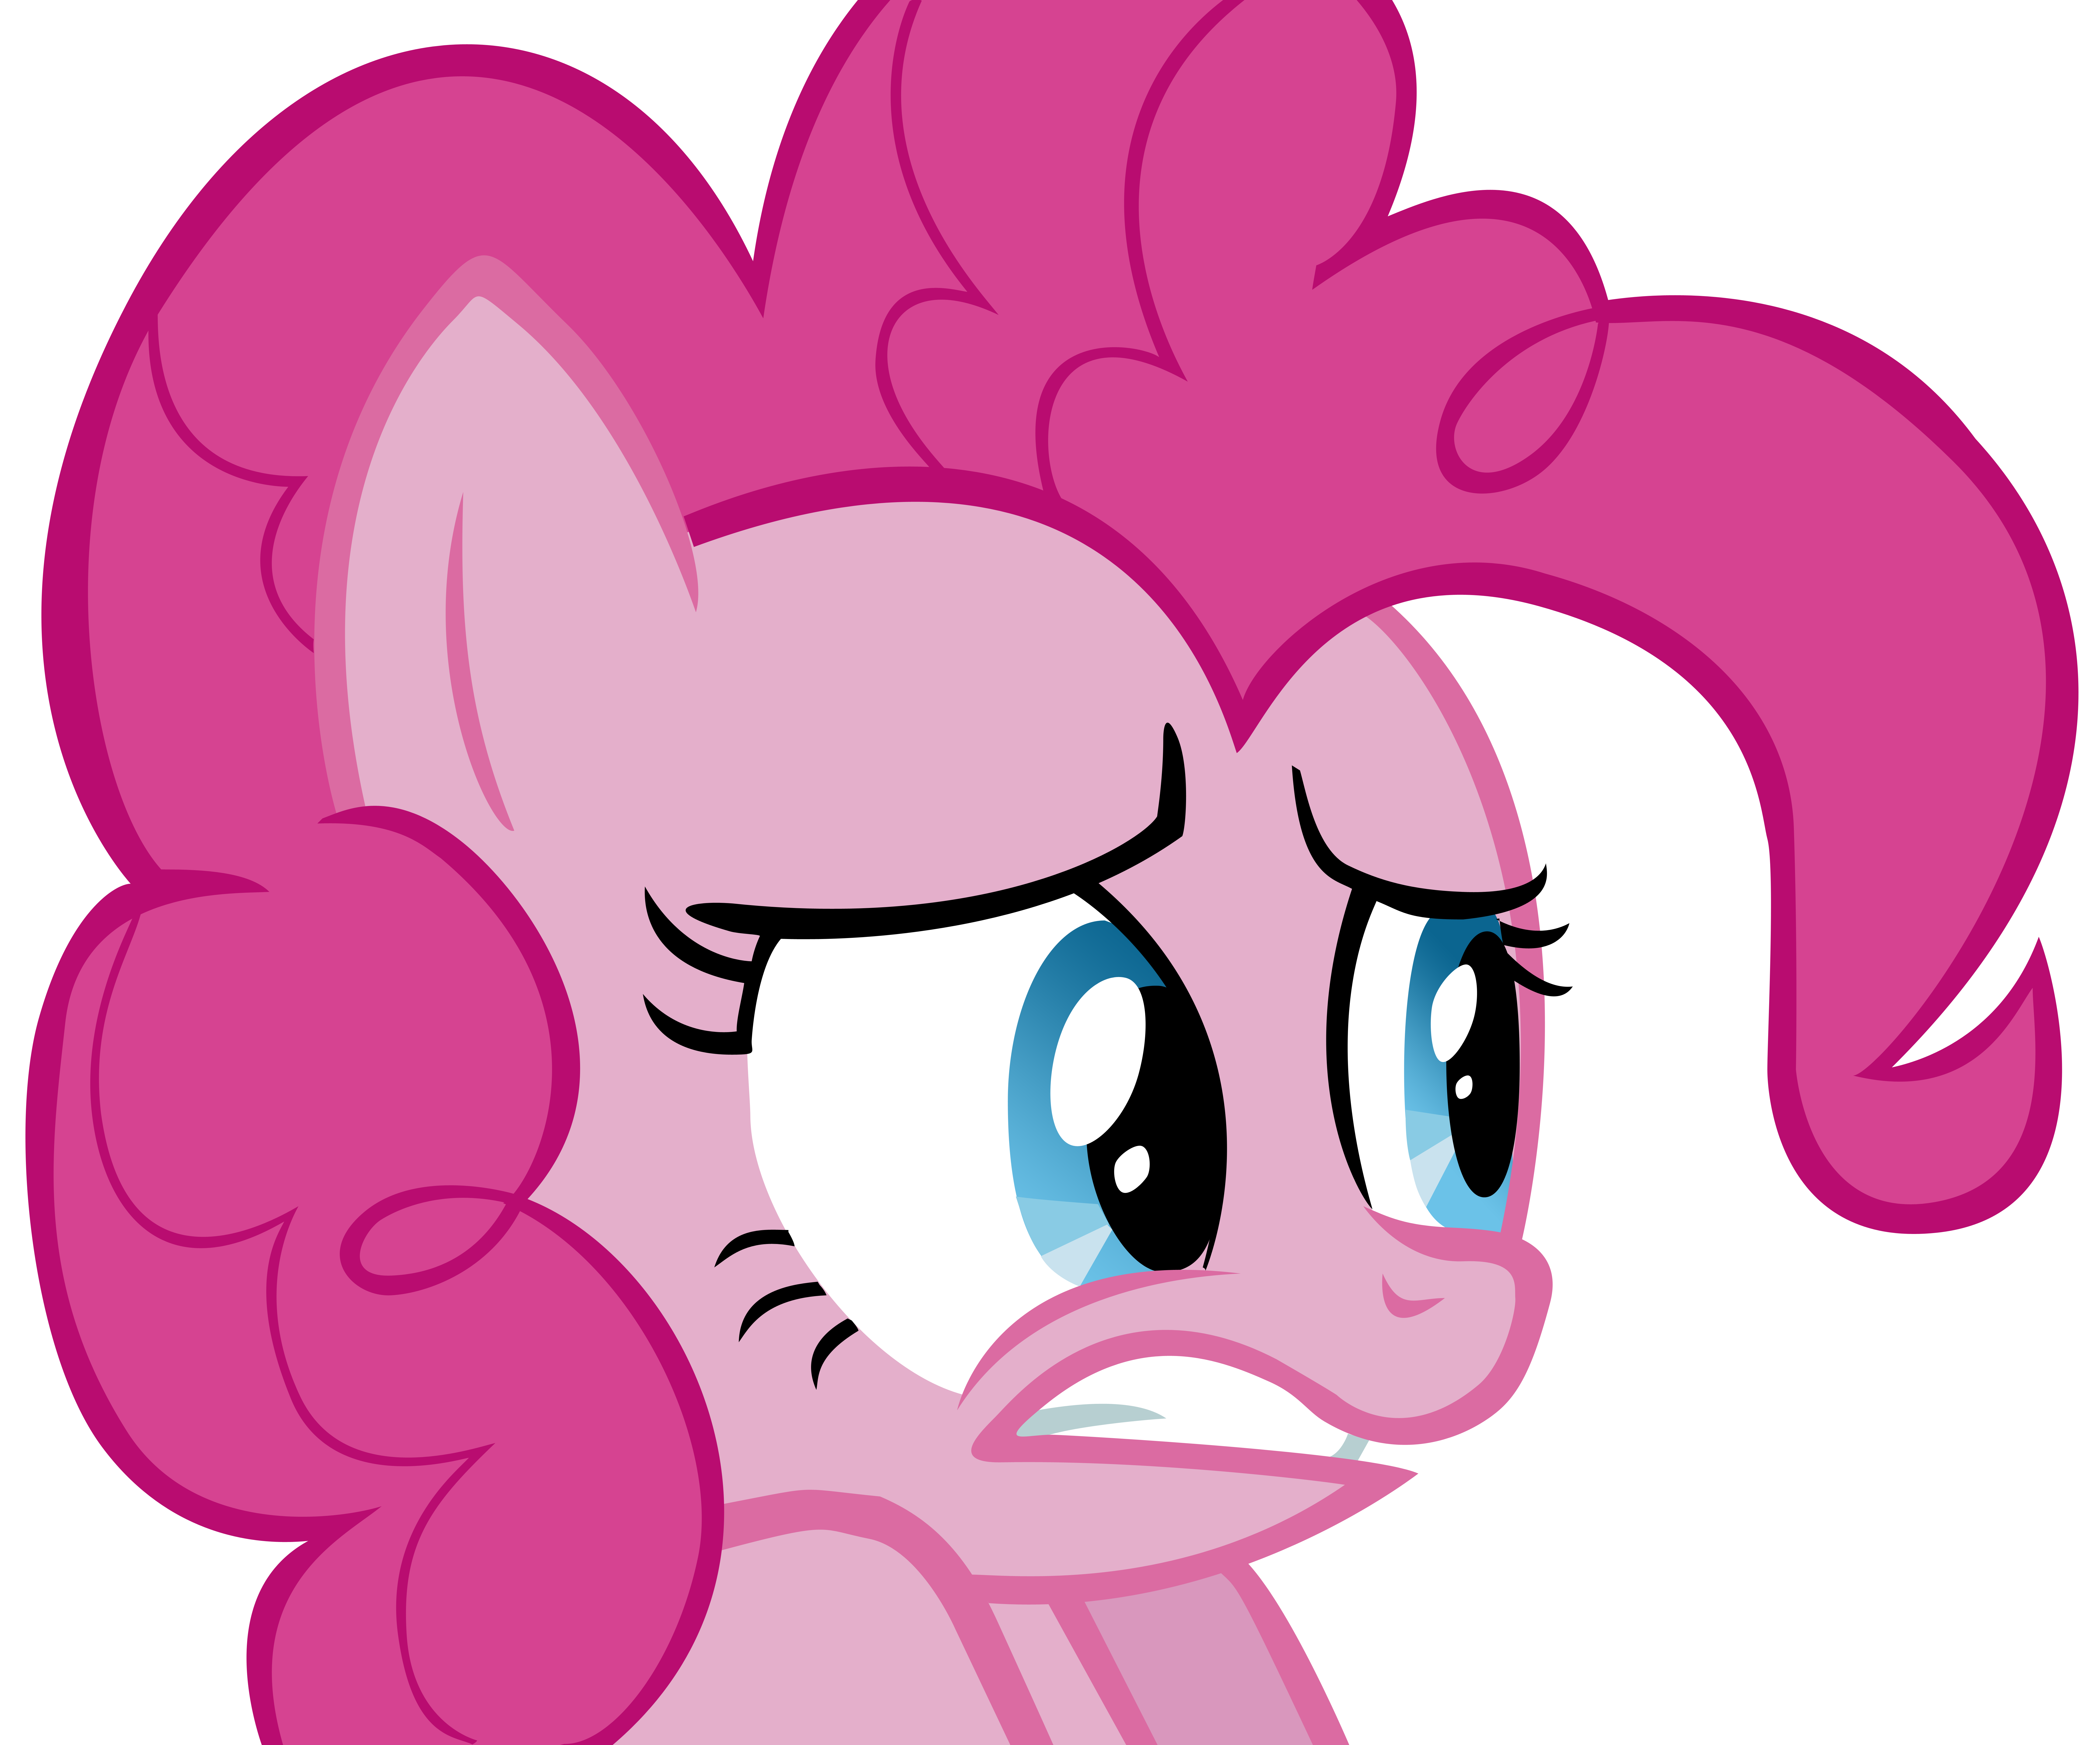 scared_pinkie_pie_by_svezate-d504ad5.png